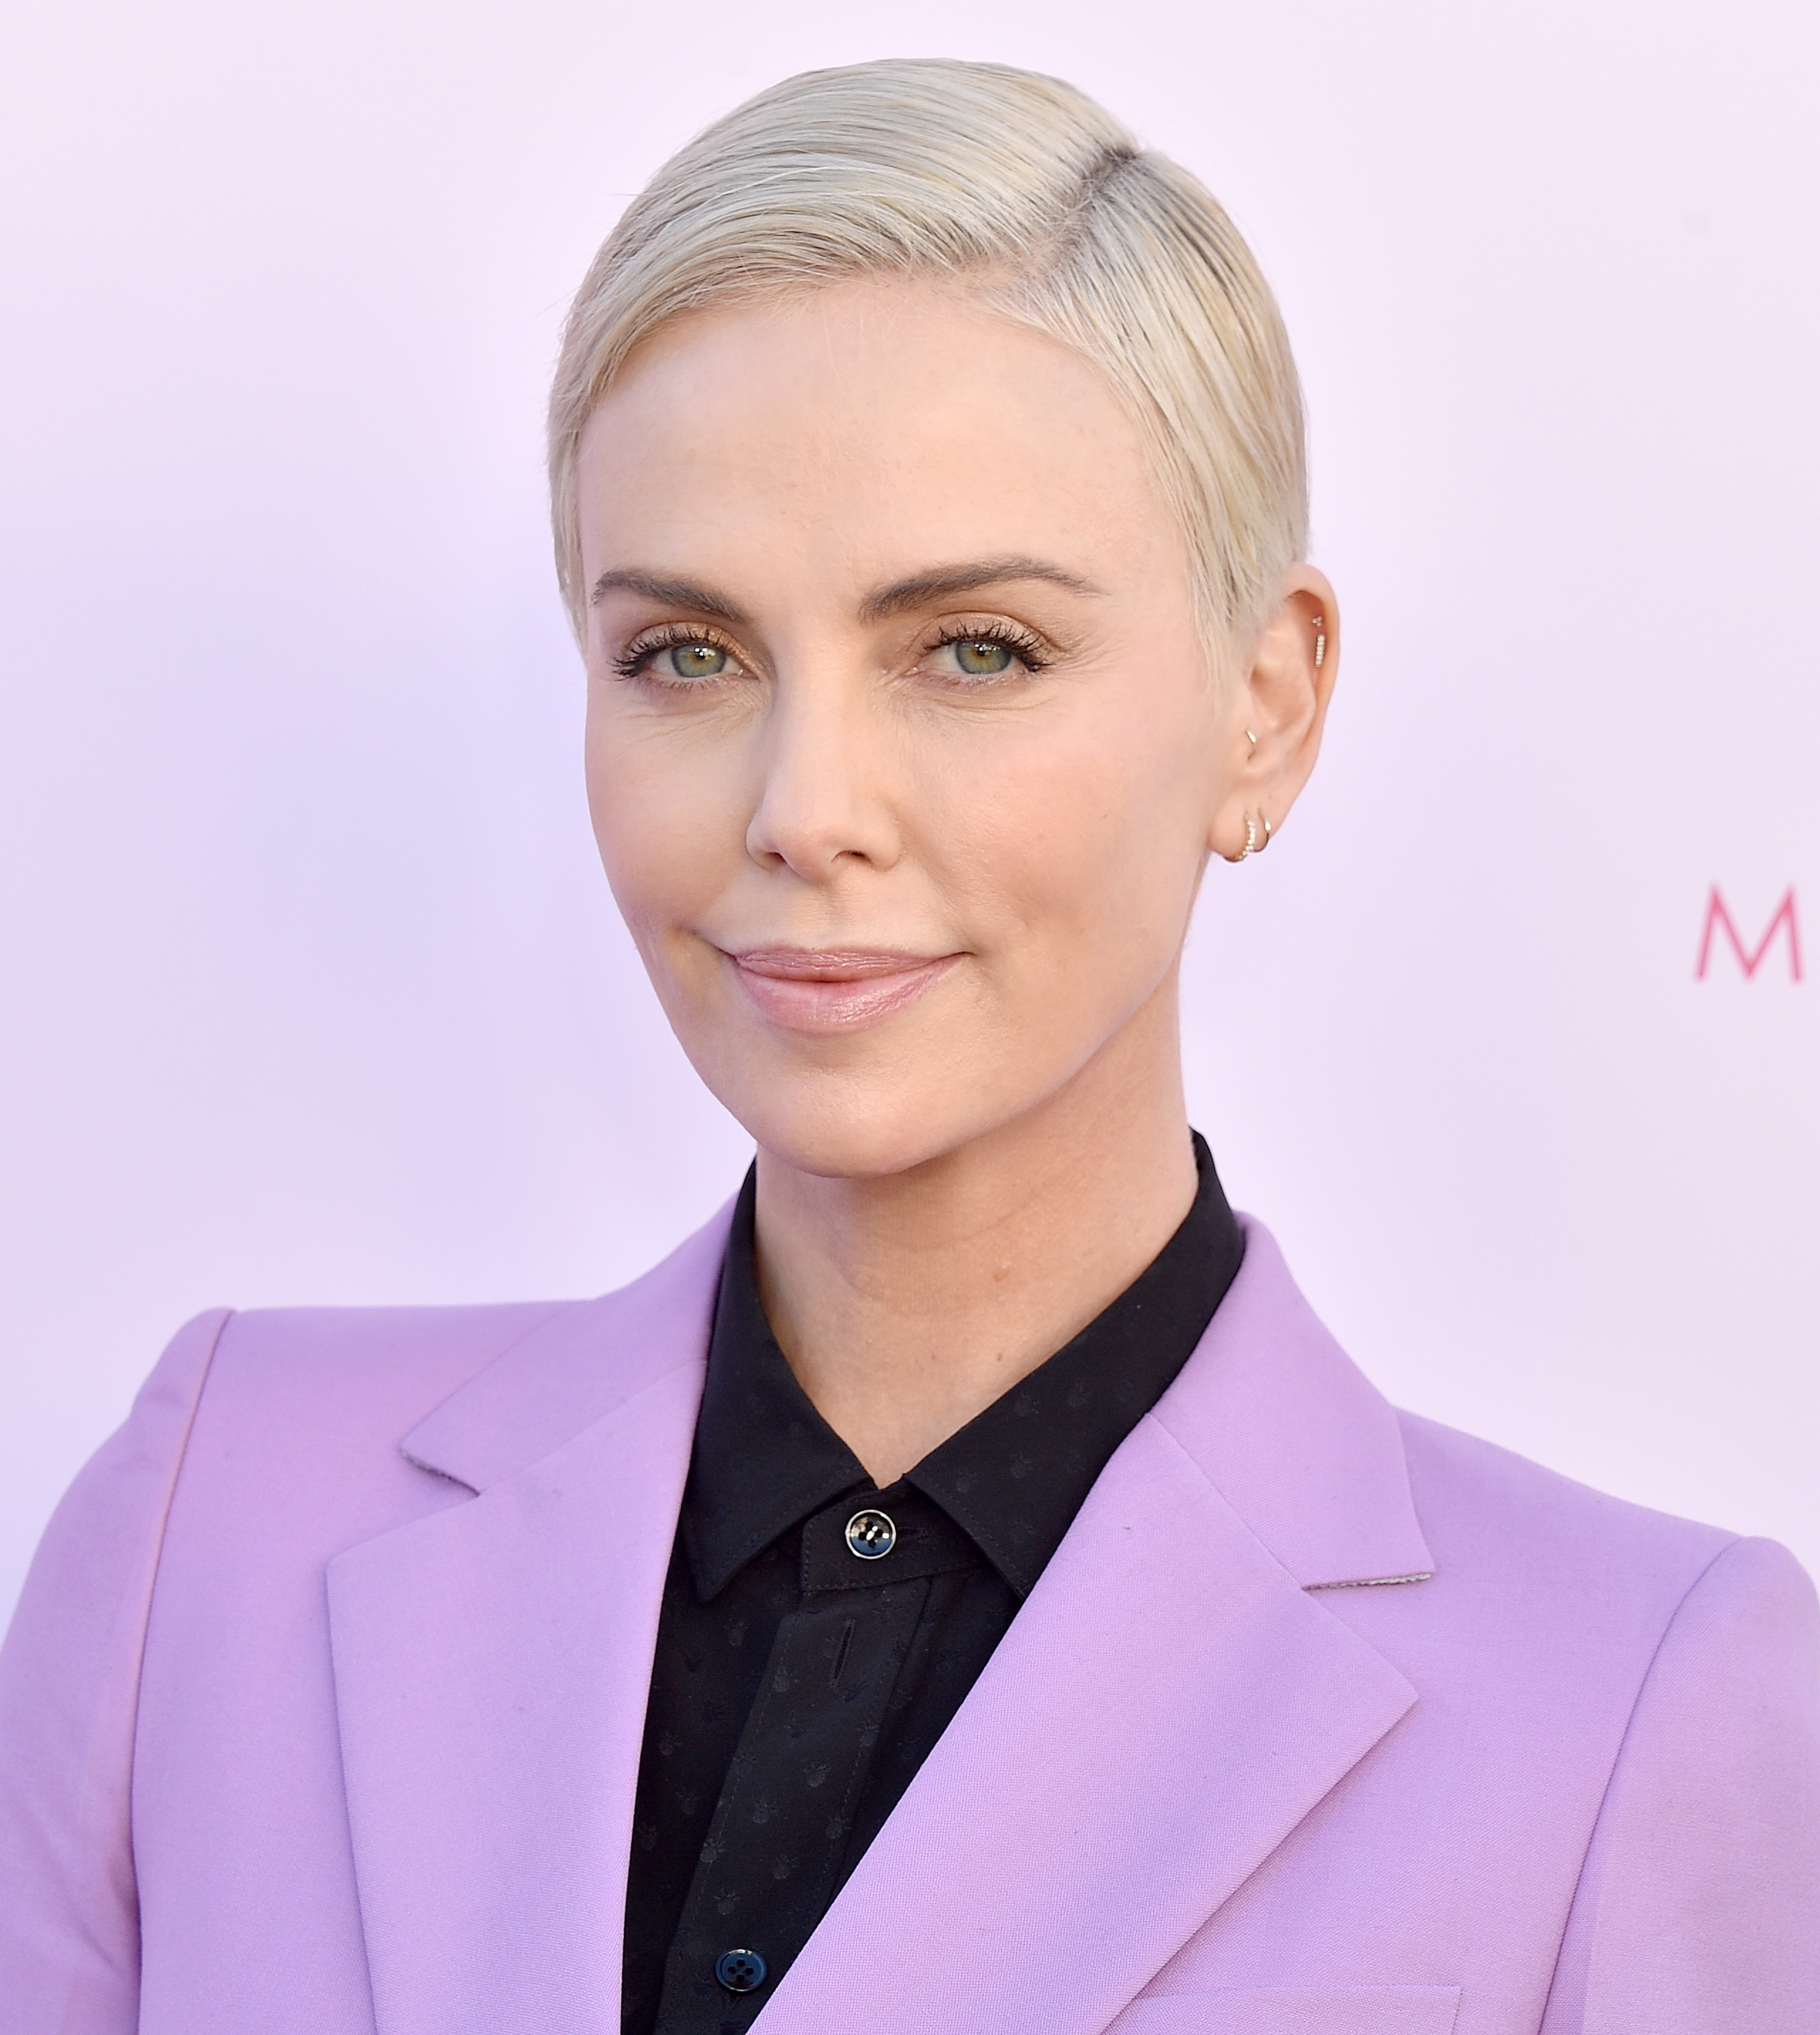 Charlize Theron bei der The Hollywood Reporter's Annual Women in Entertainment Breakfast Gala in den Milk Studios am 11. Dezember 2019 in Hollywood, Kalifornien | Quelle: Getty Images